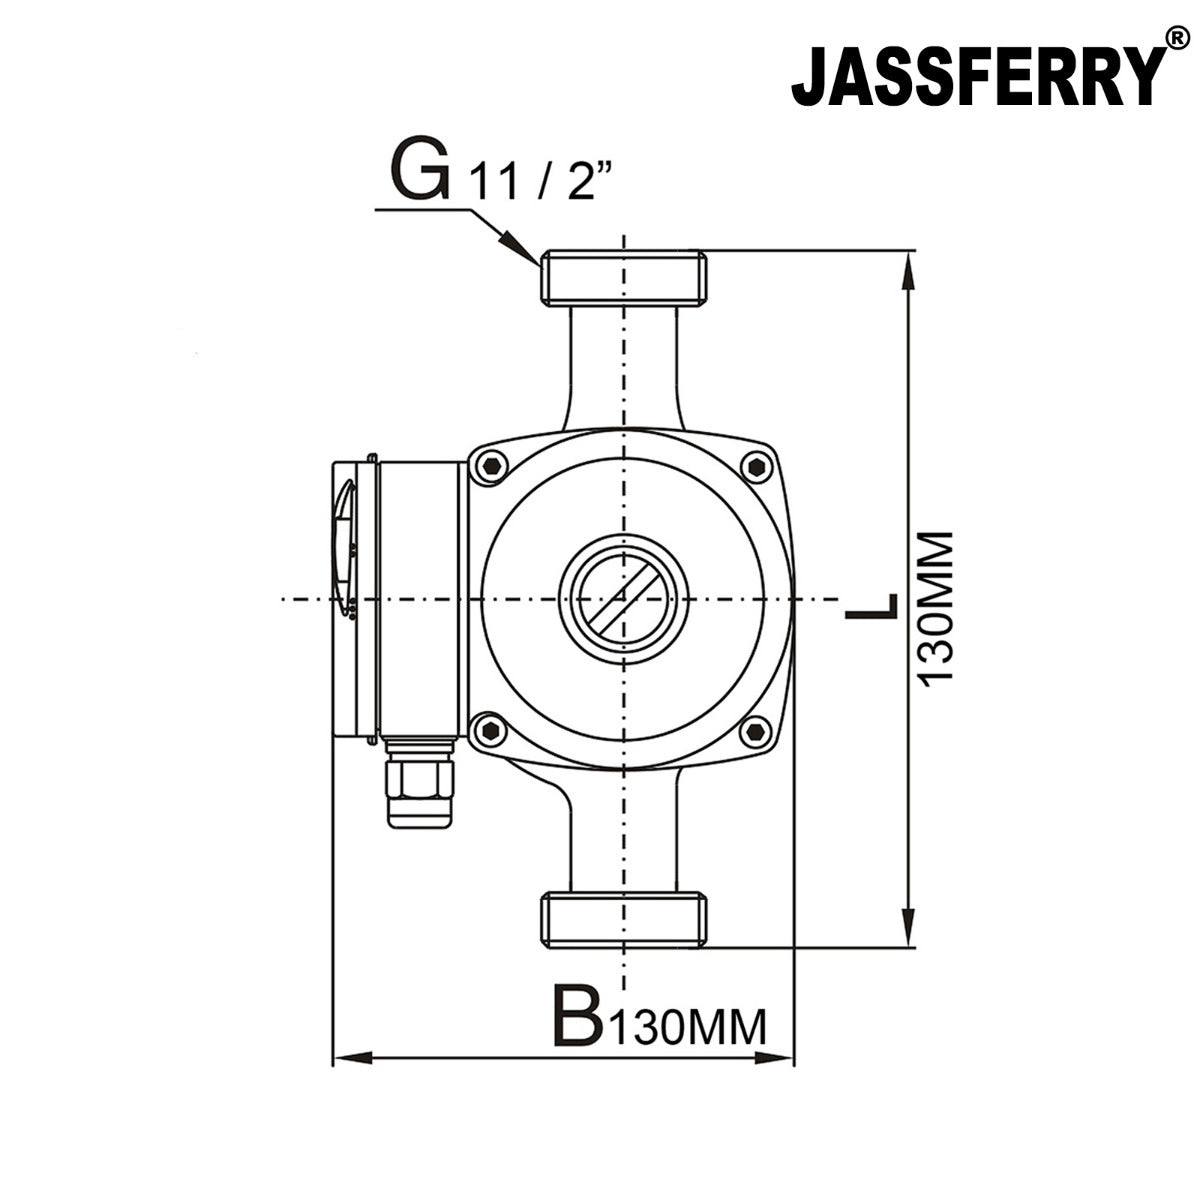 JassferryJASSFERRY New Heating Pump Hot Water Circulating Central System ReplacementHeating Pumps